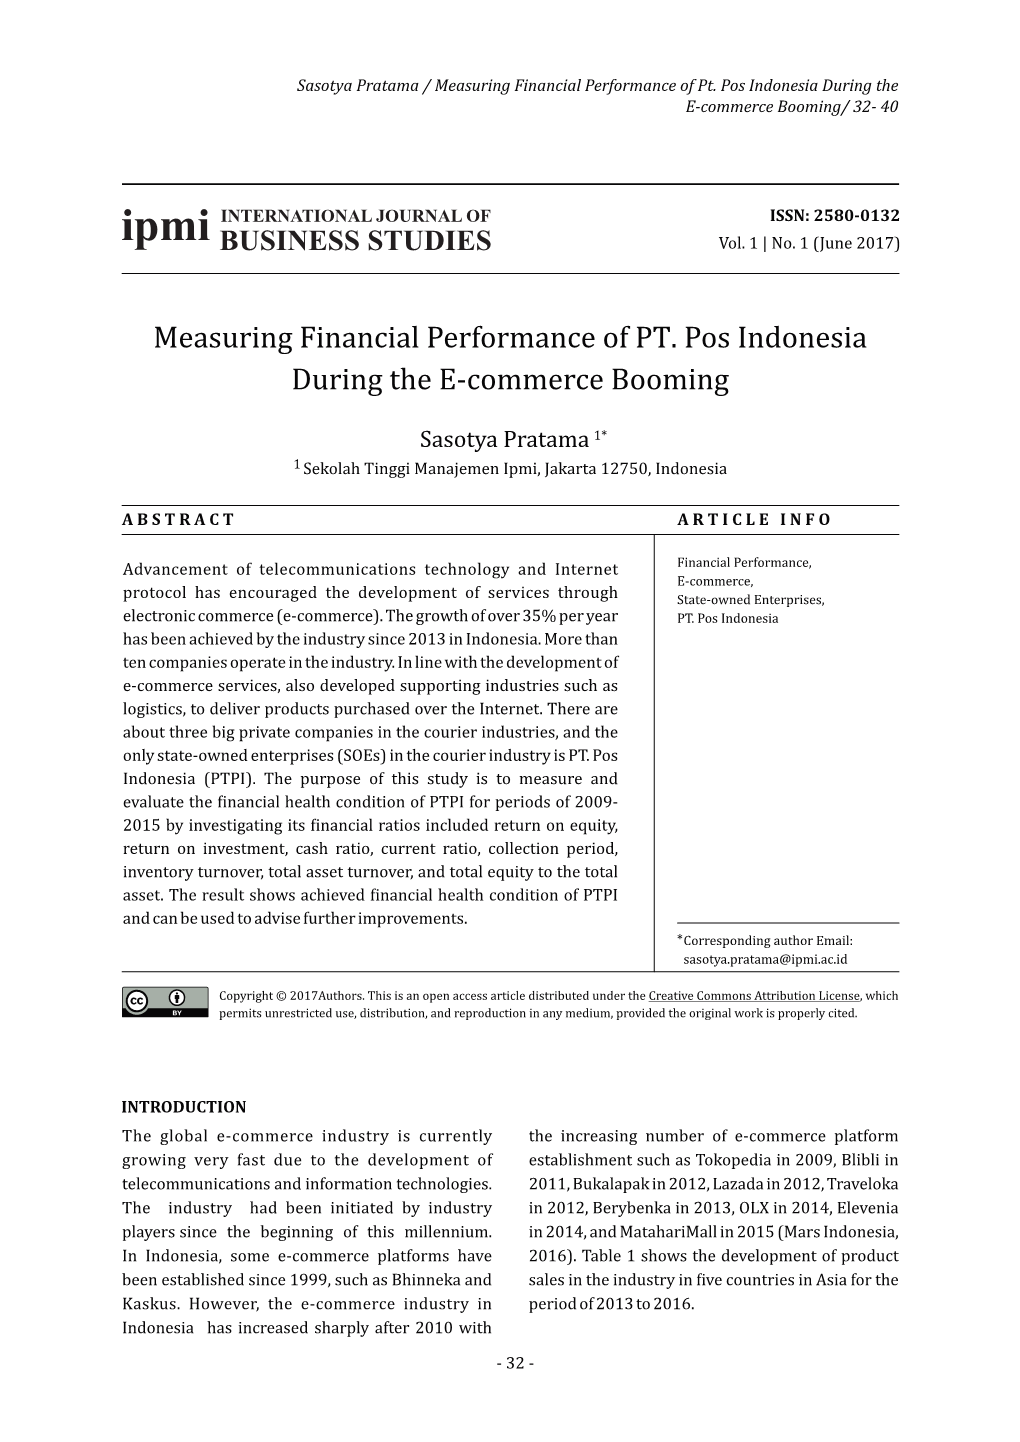 Measuring Financial Performance of Pt. Pos Indonesia During the E-Commerce Booming/ 32- 40